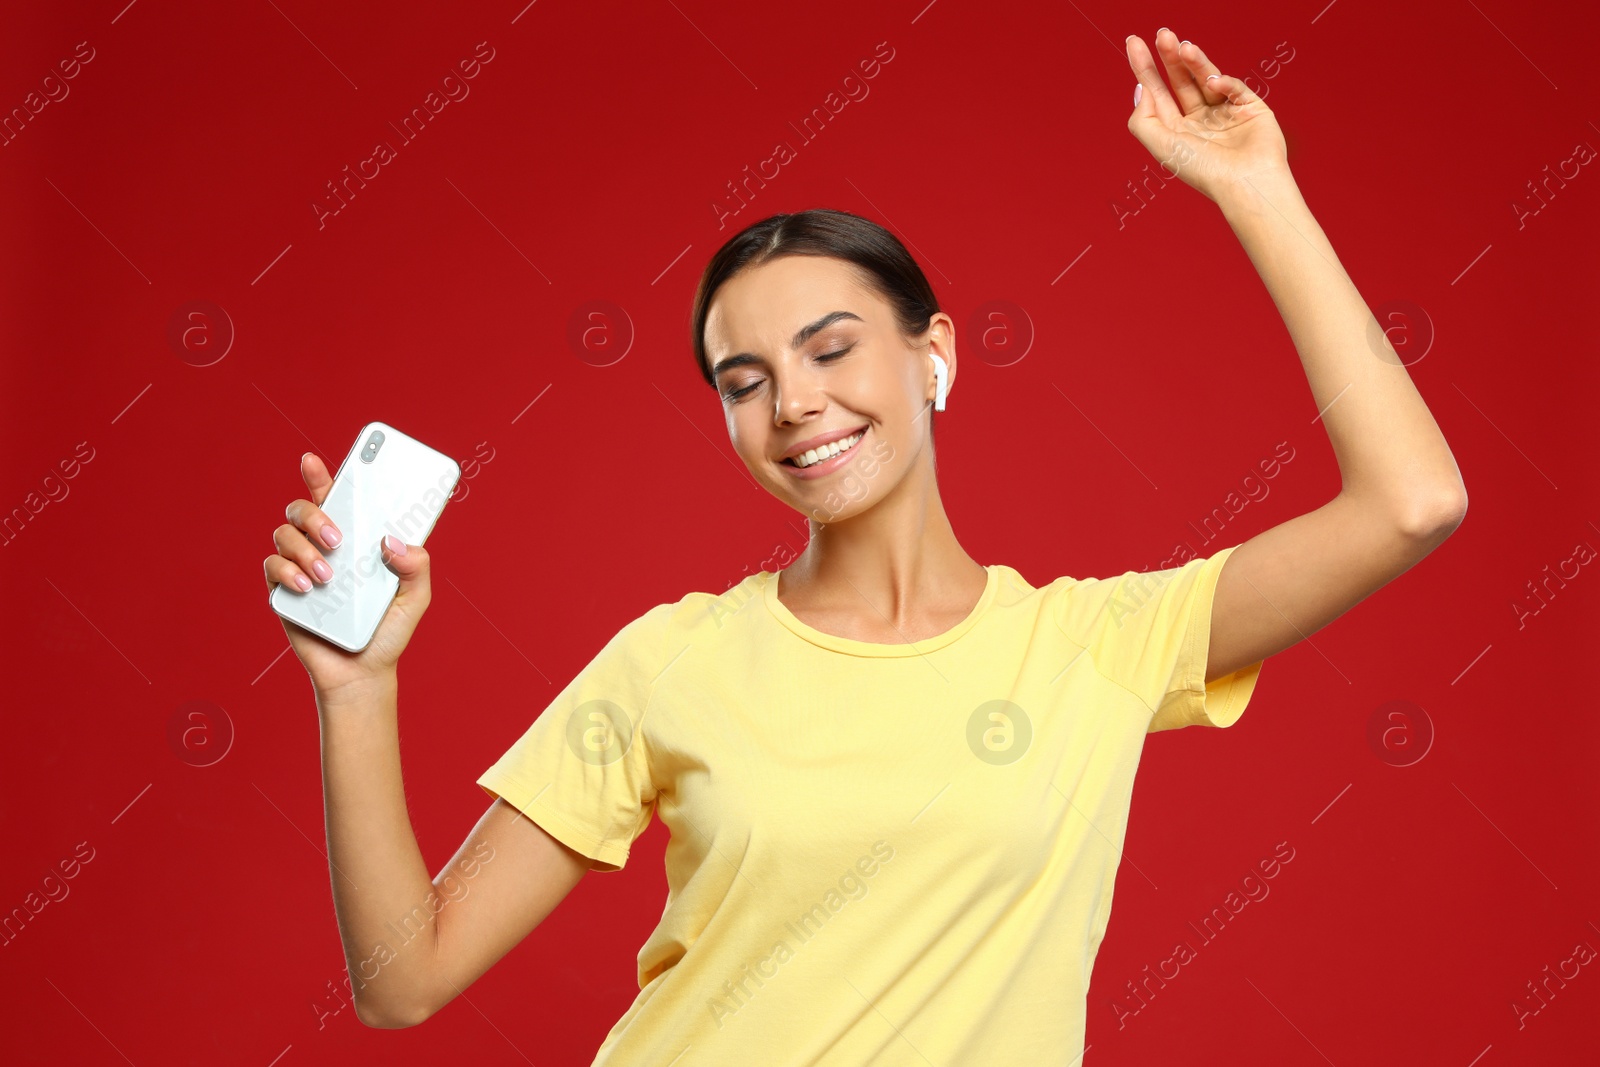 Photo of Happy young woman with smartphone listening to music through wireless earphones on red background